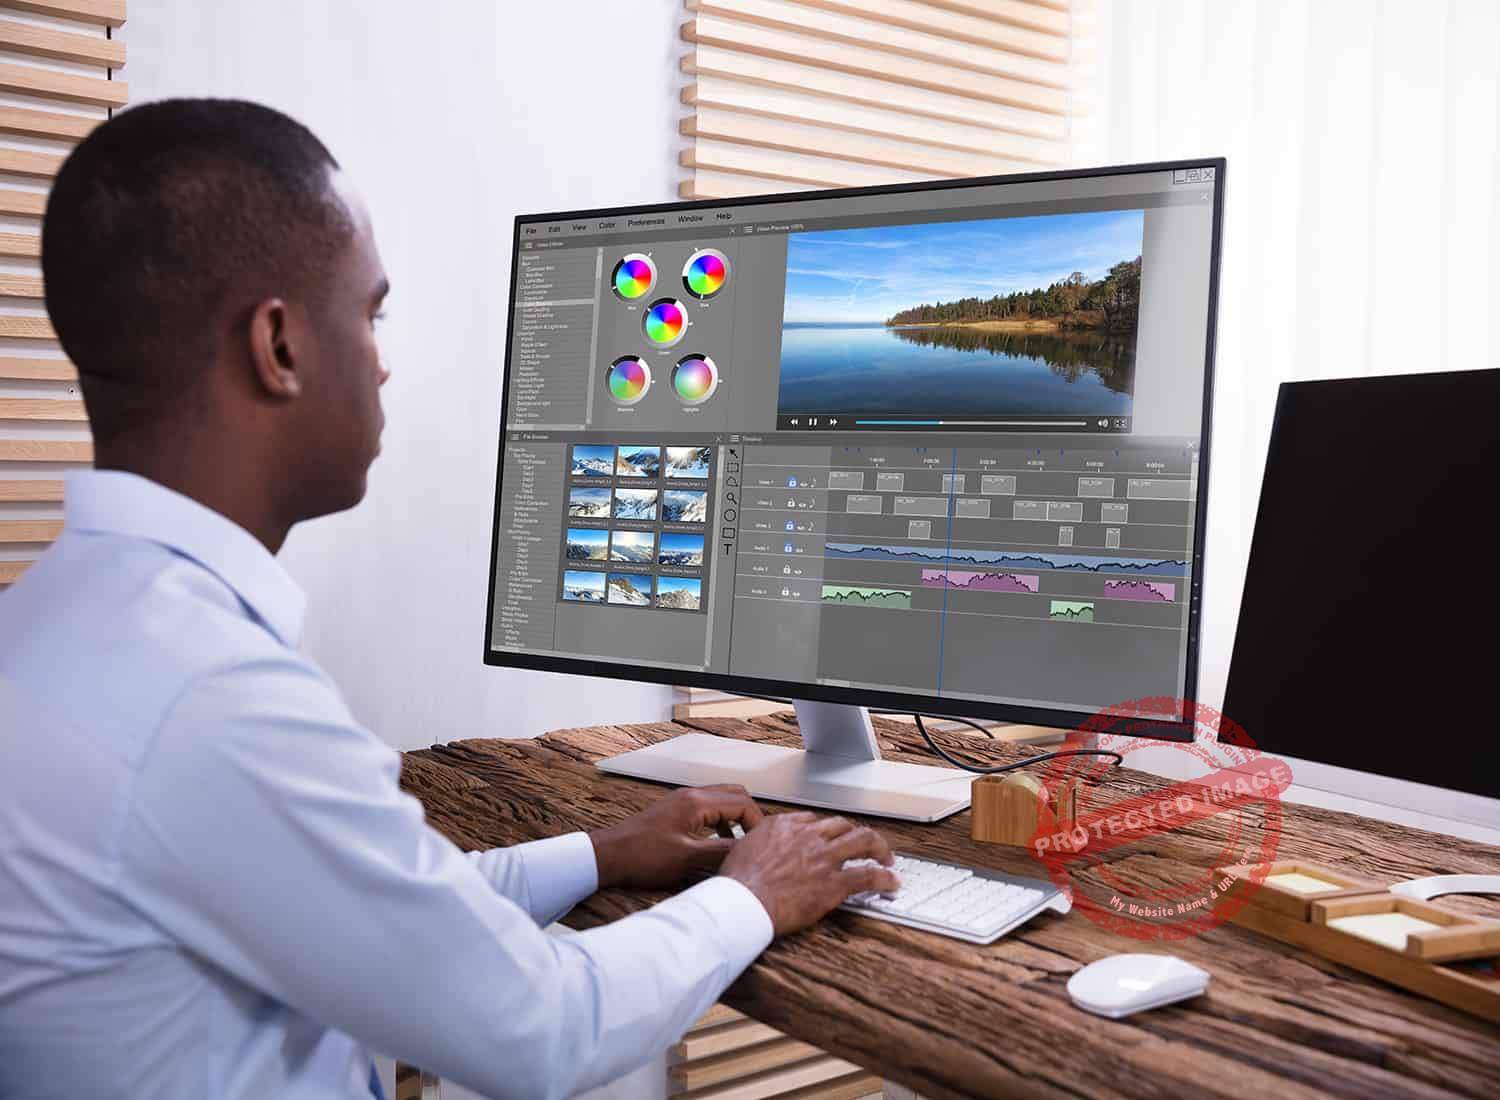 Best Computer For Graphic Design And Video Editing (2023) [TOP SELECTIONS]